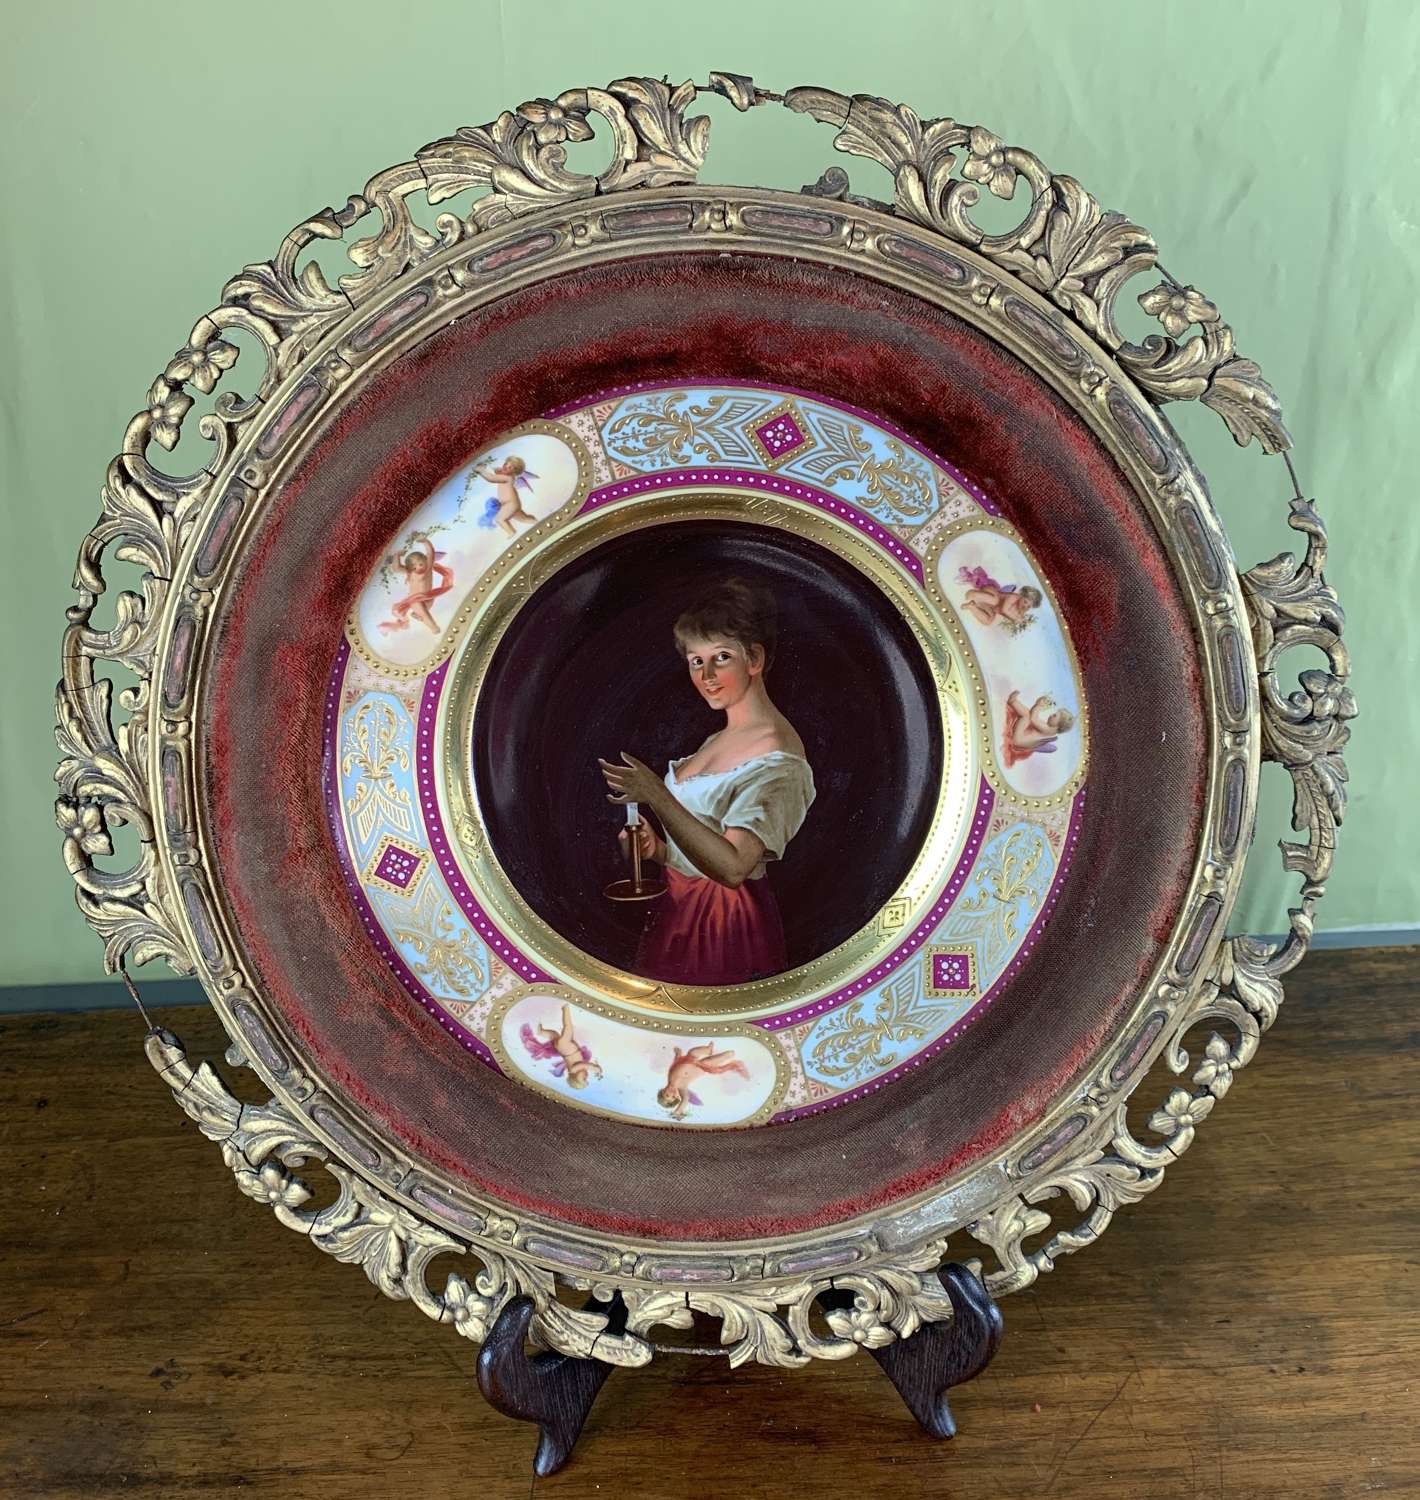 Vienna Hand Painted Porcelain Plate titled 'Gute Nacht'